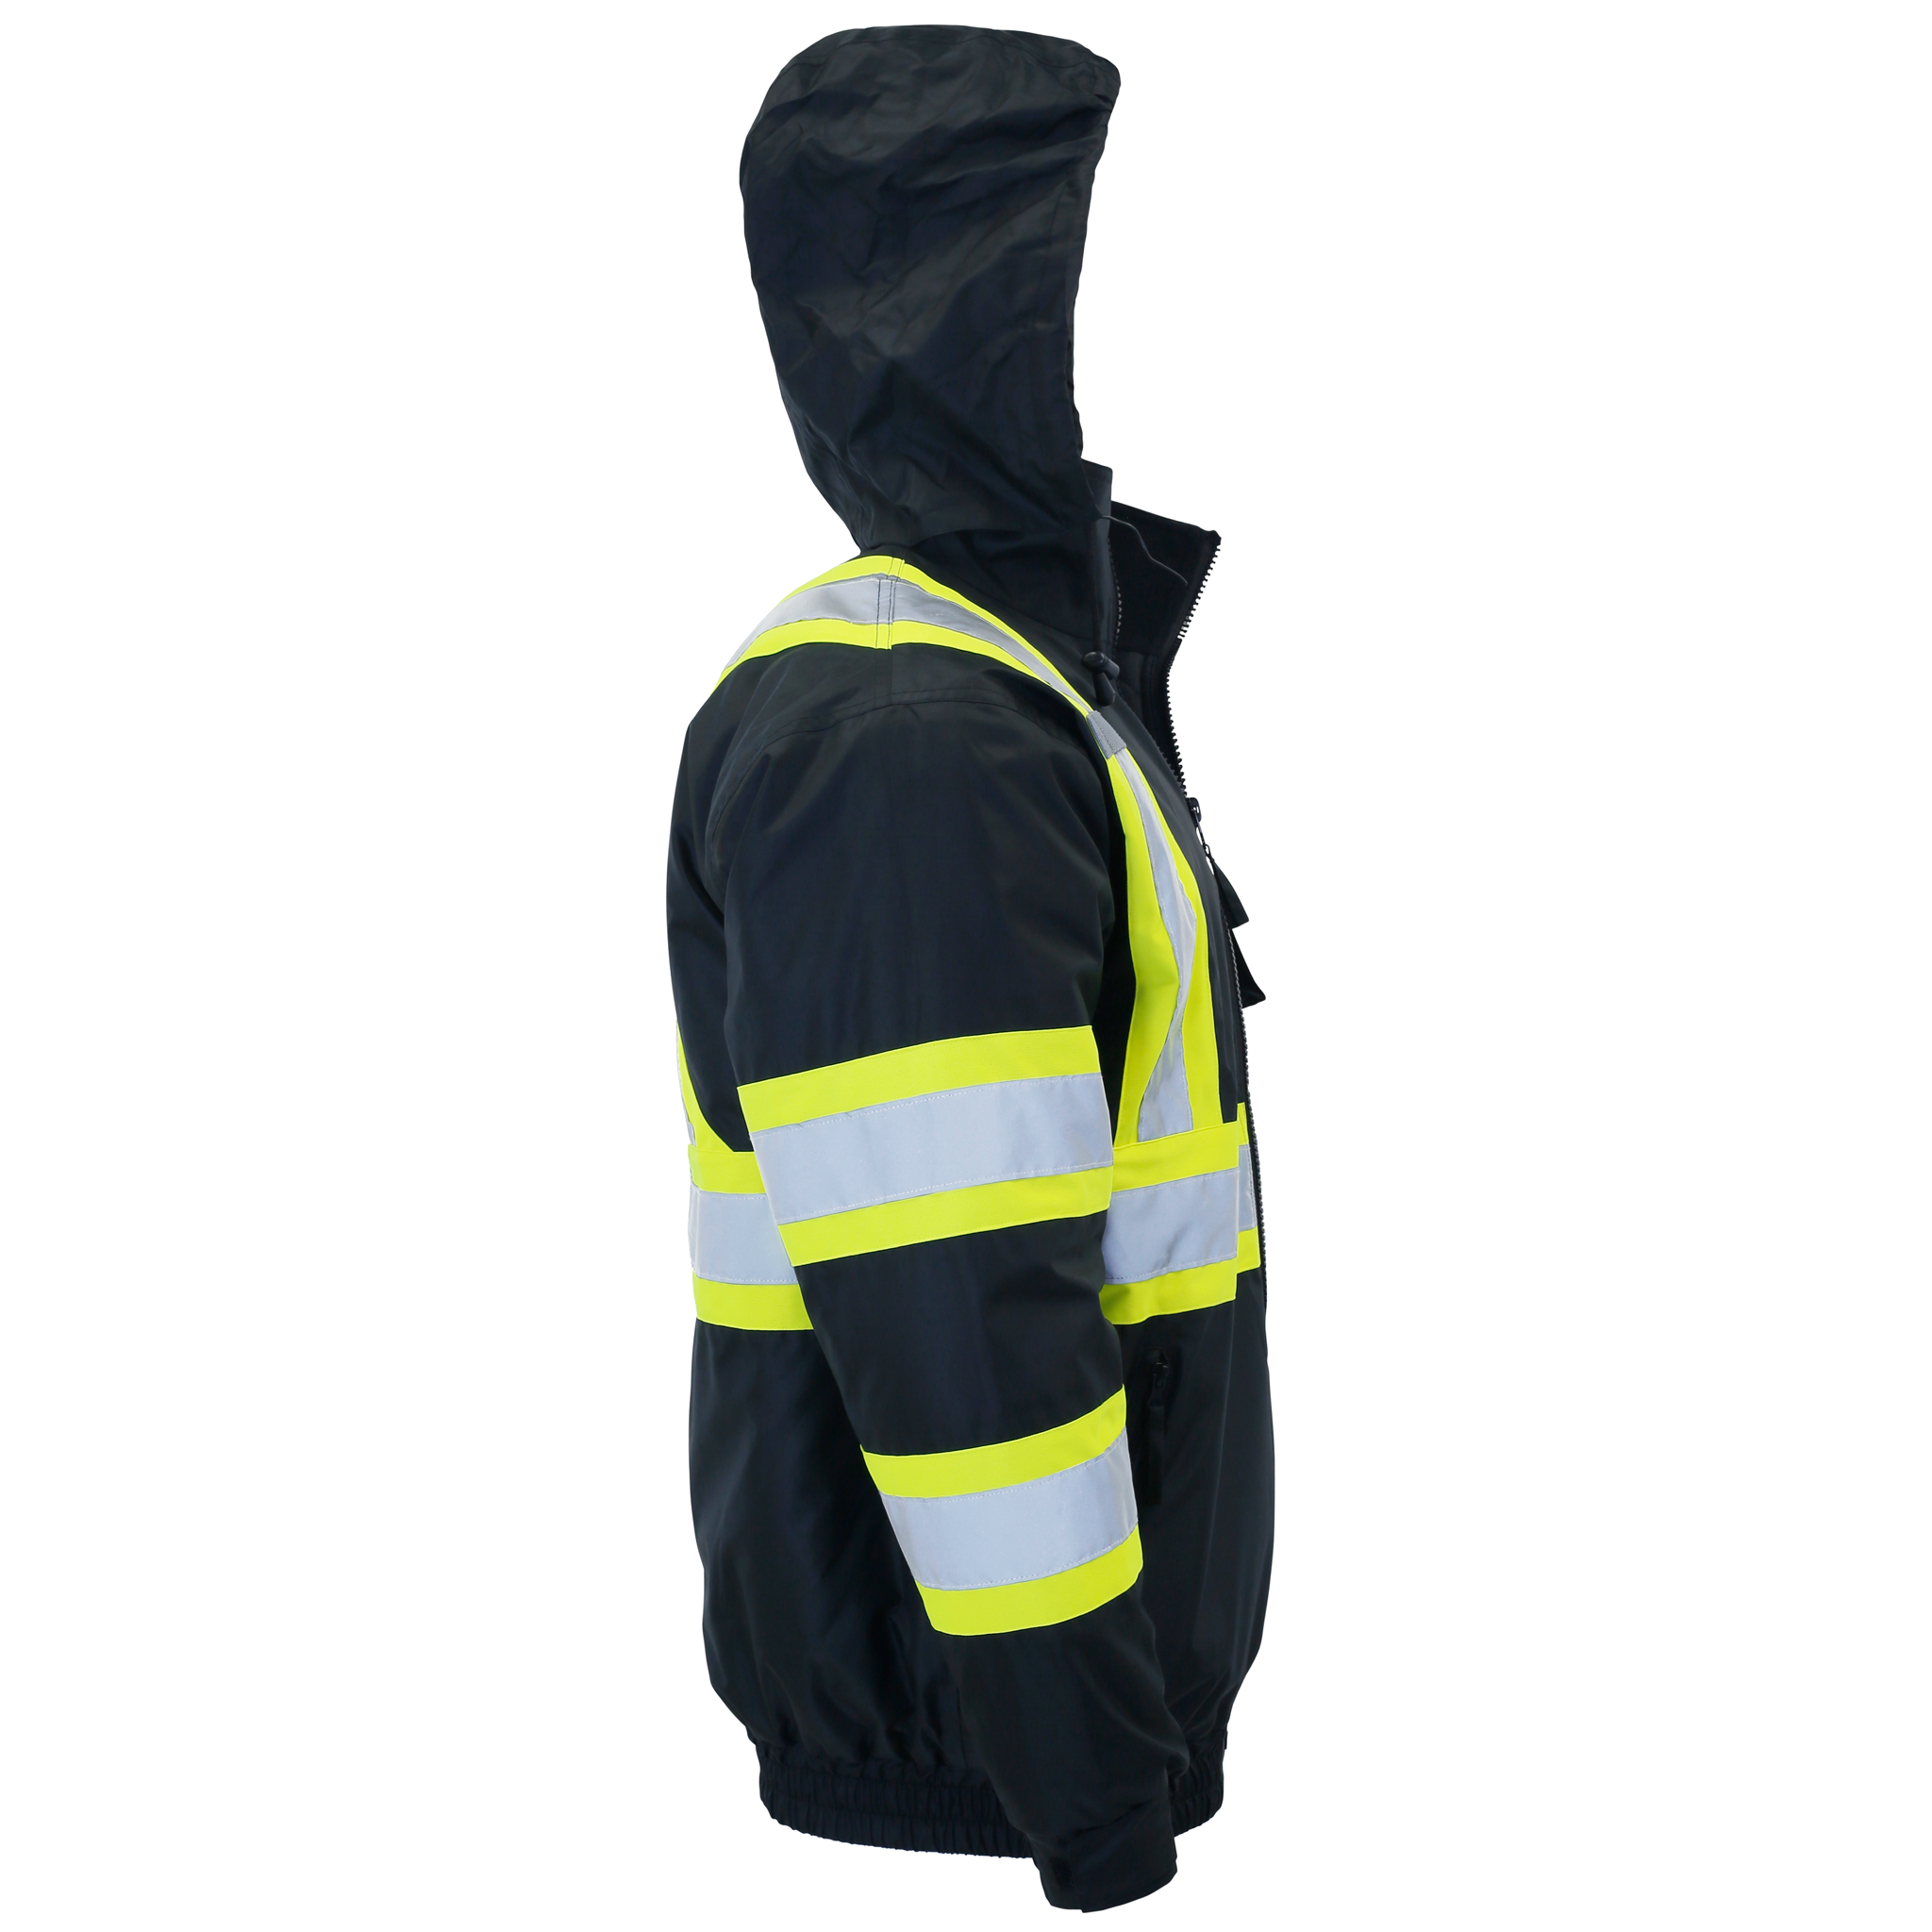 Hi-Vis X-Back Two-Tone Safety Bomber Jacket with Reflective Stripes